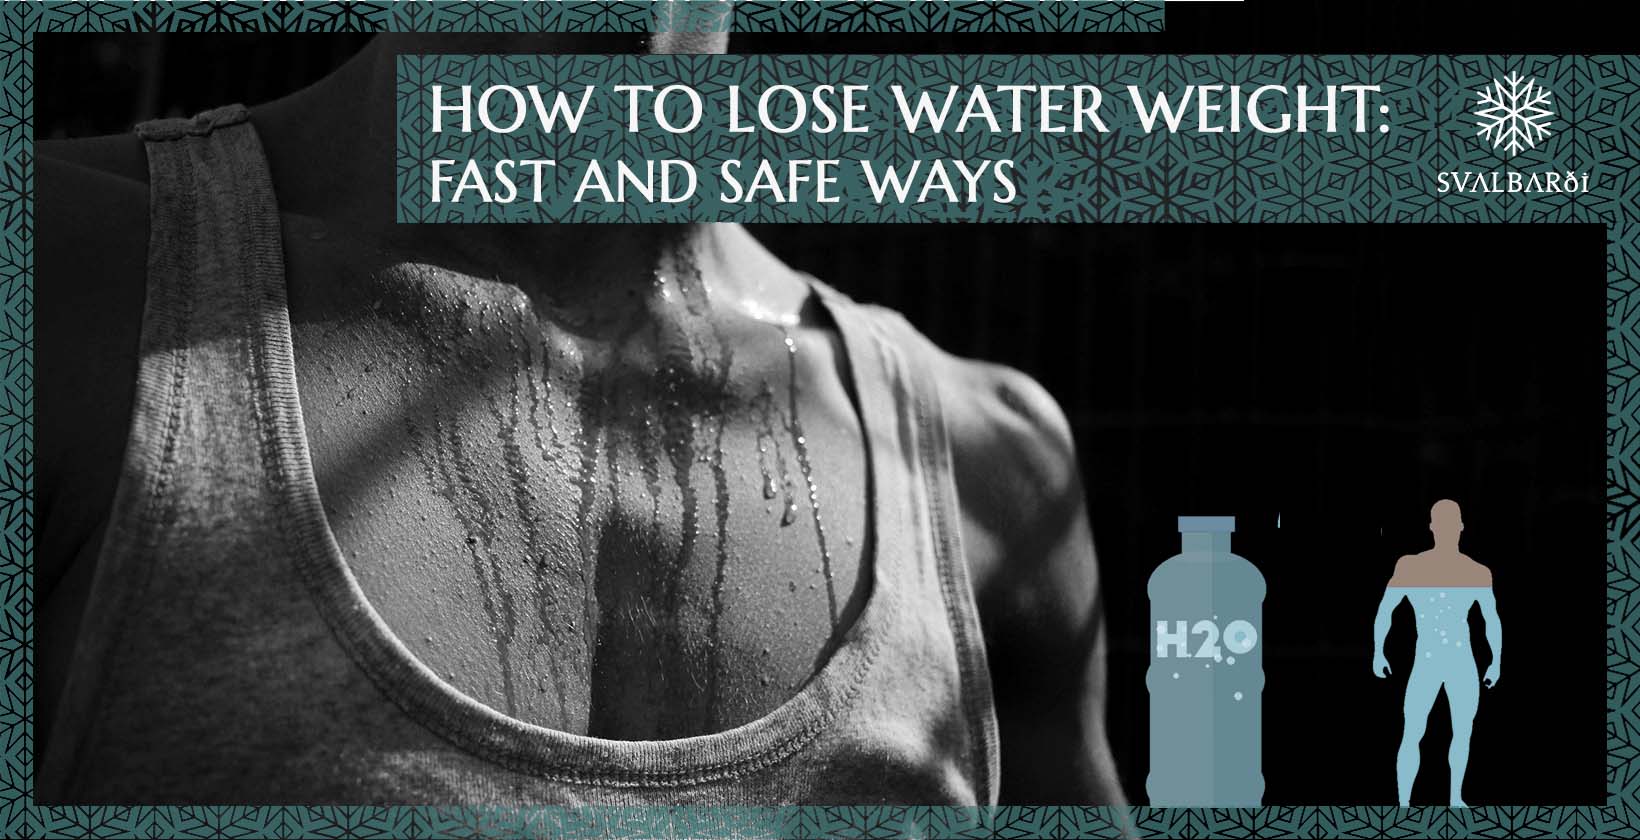 Losing water weight fast